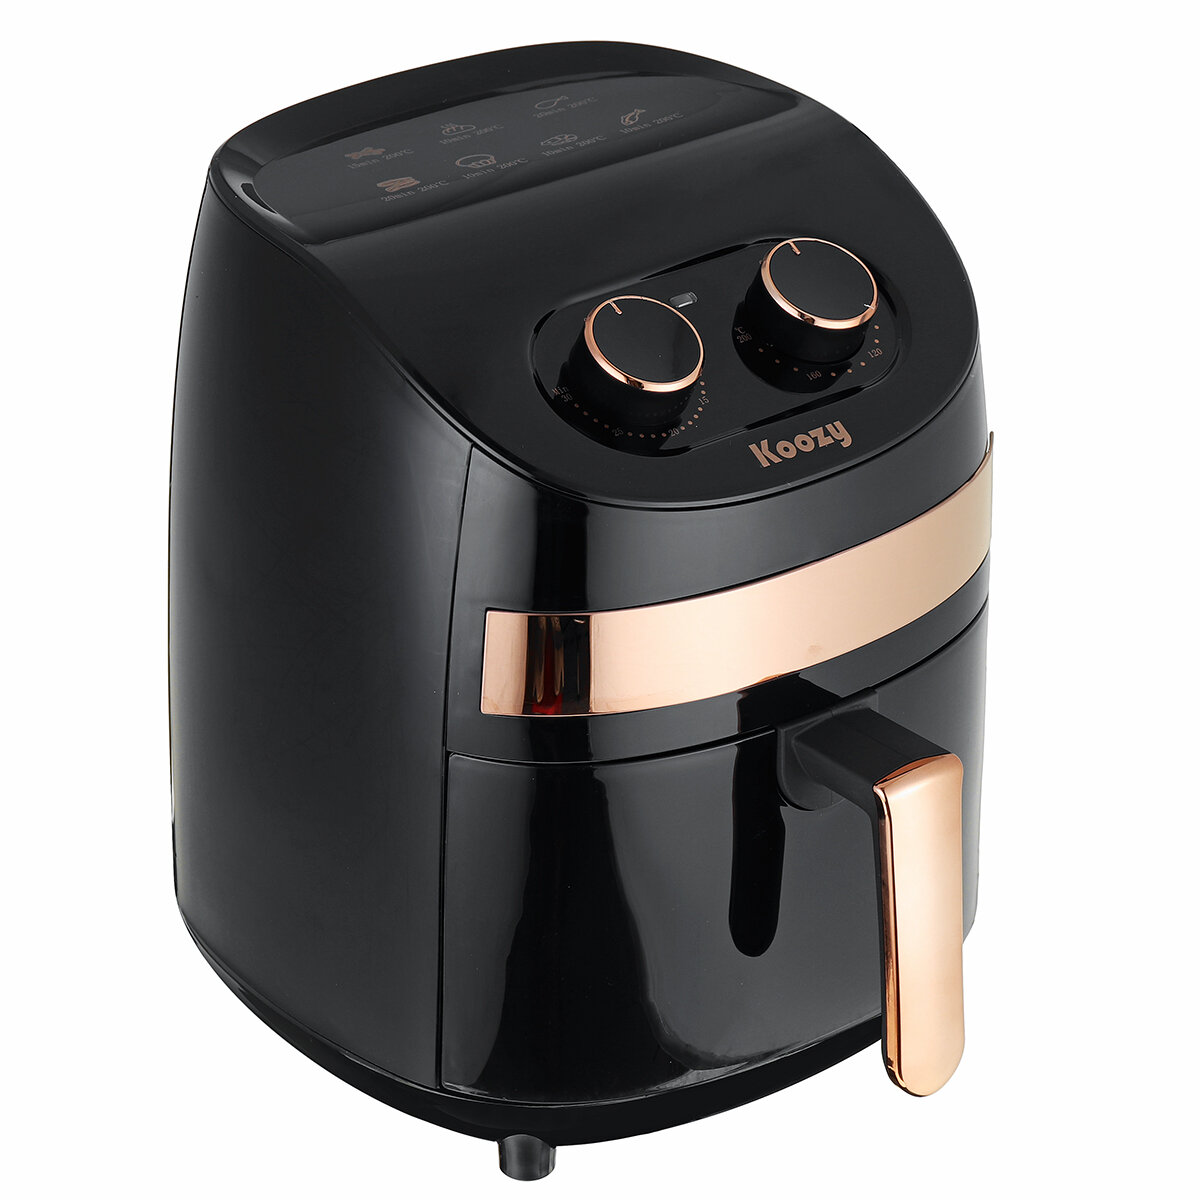 

Monda 220V 1500W 3.5L Electric Air Fryer Oil Free Kitchen Oven Healthy Cooker Airfryer with Removable Basket